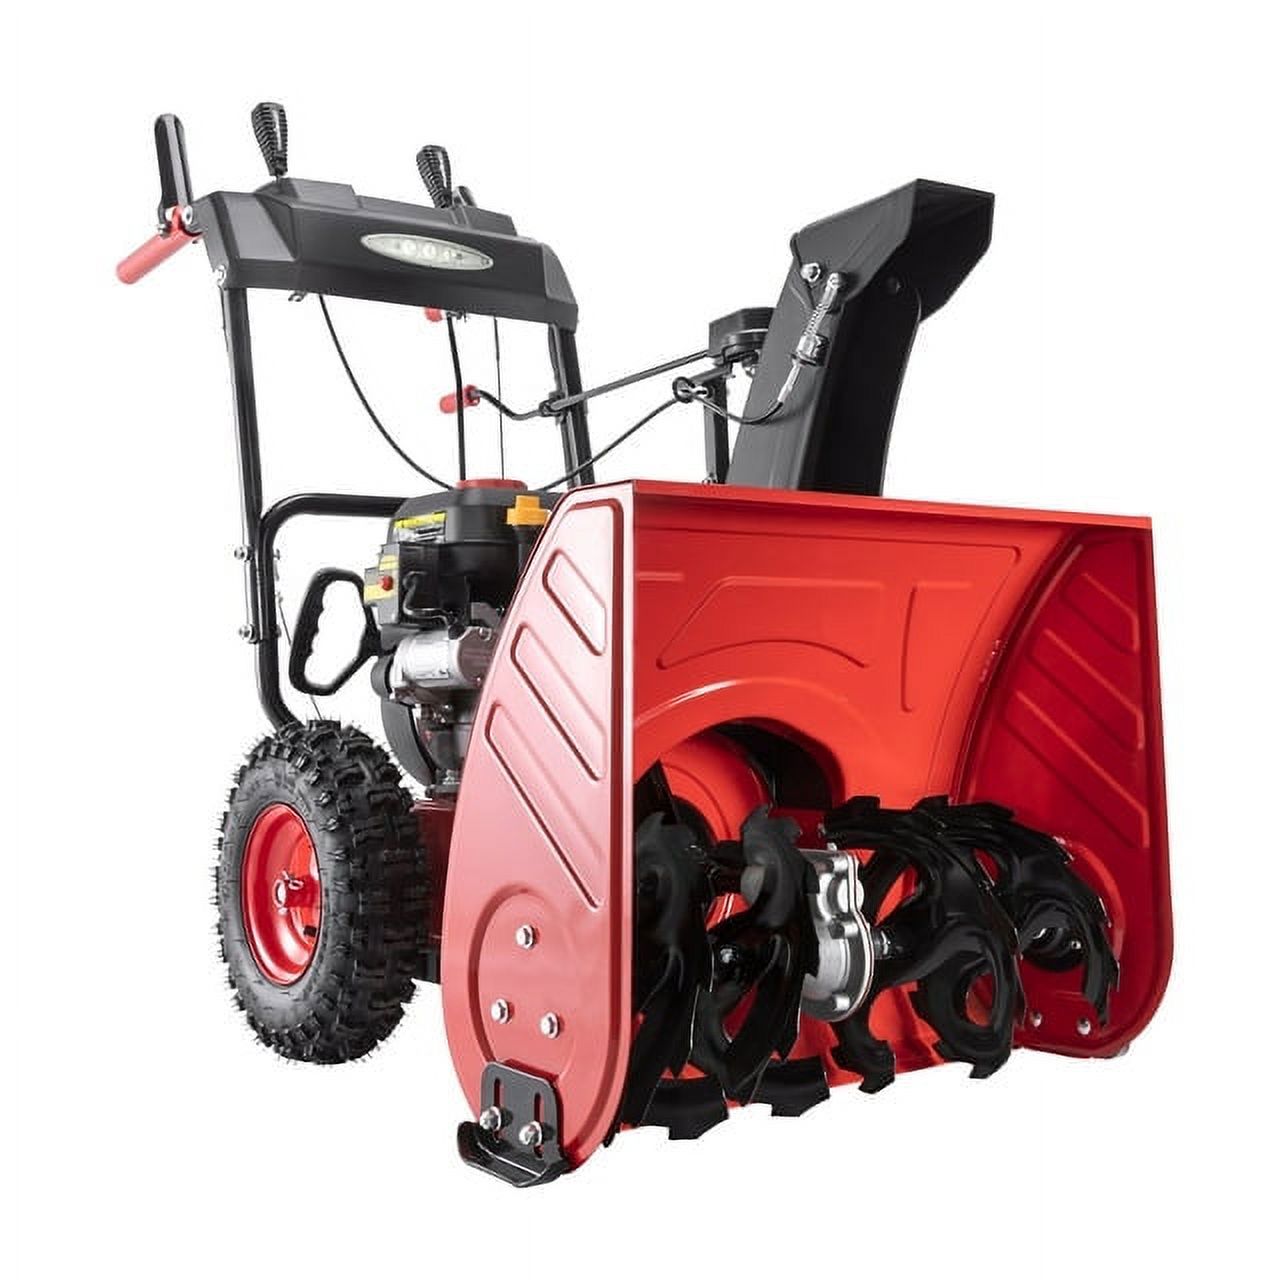 PowerSmart 26 in. Two-Stage Electric Start 252CC Self Propelled Gas Snow Blower